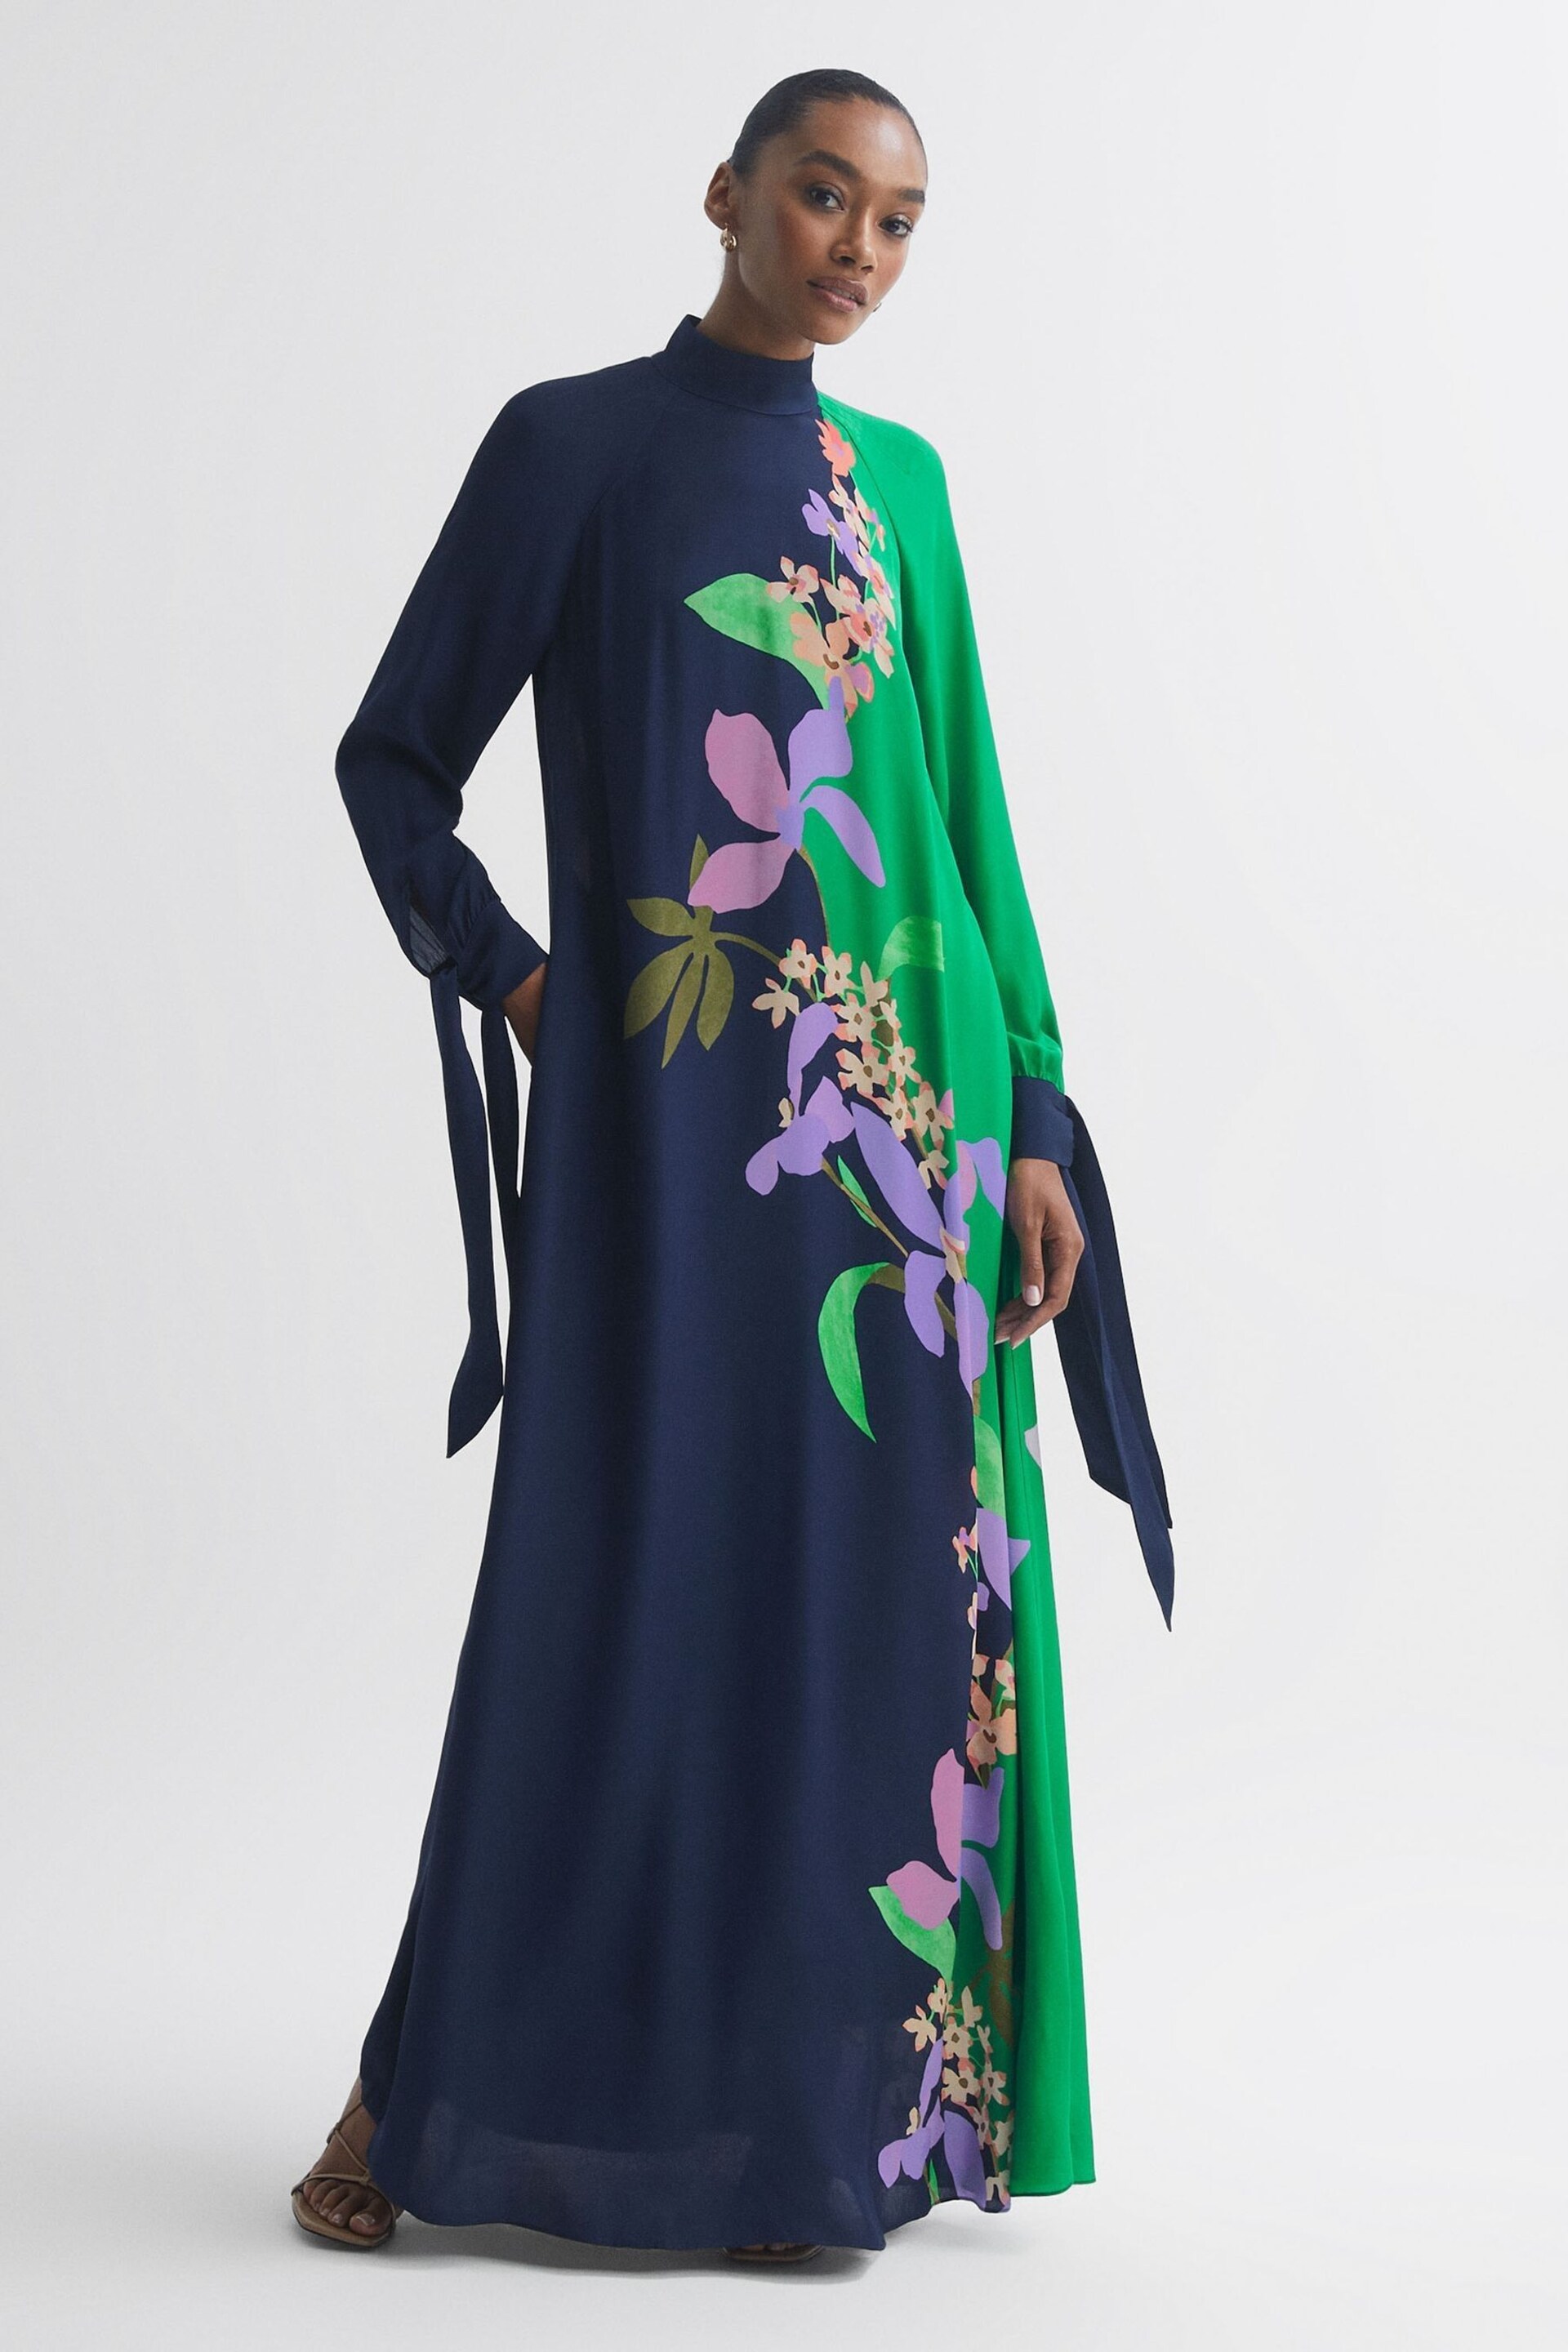 Florere Floral Tie Cuff Maxi Dress - Image 1 of 6